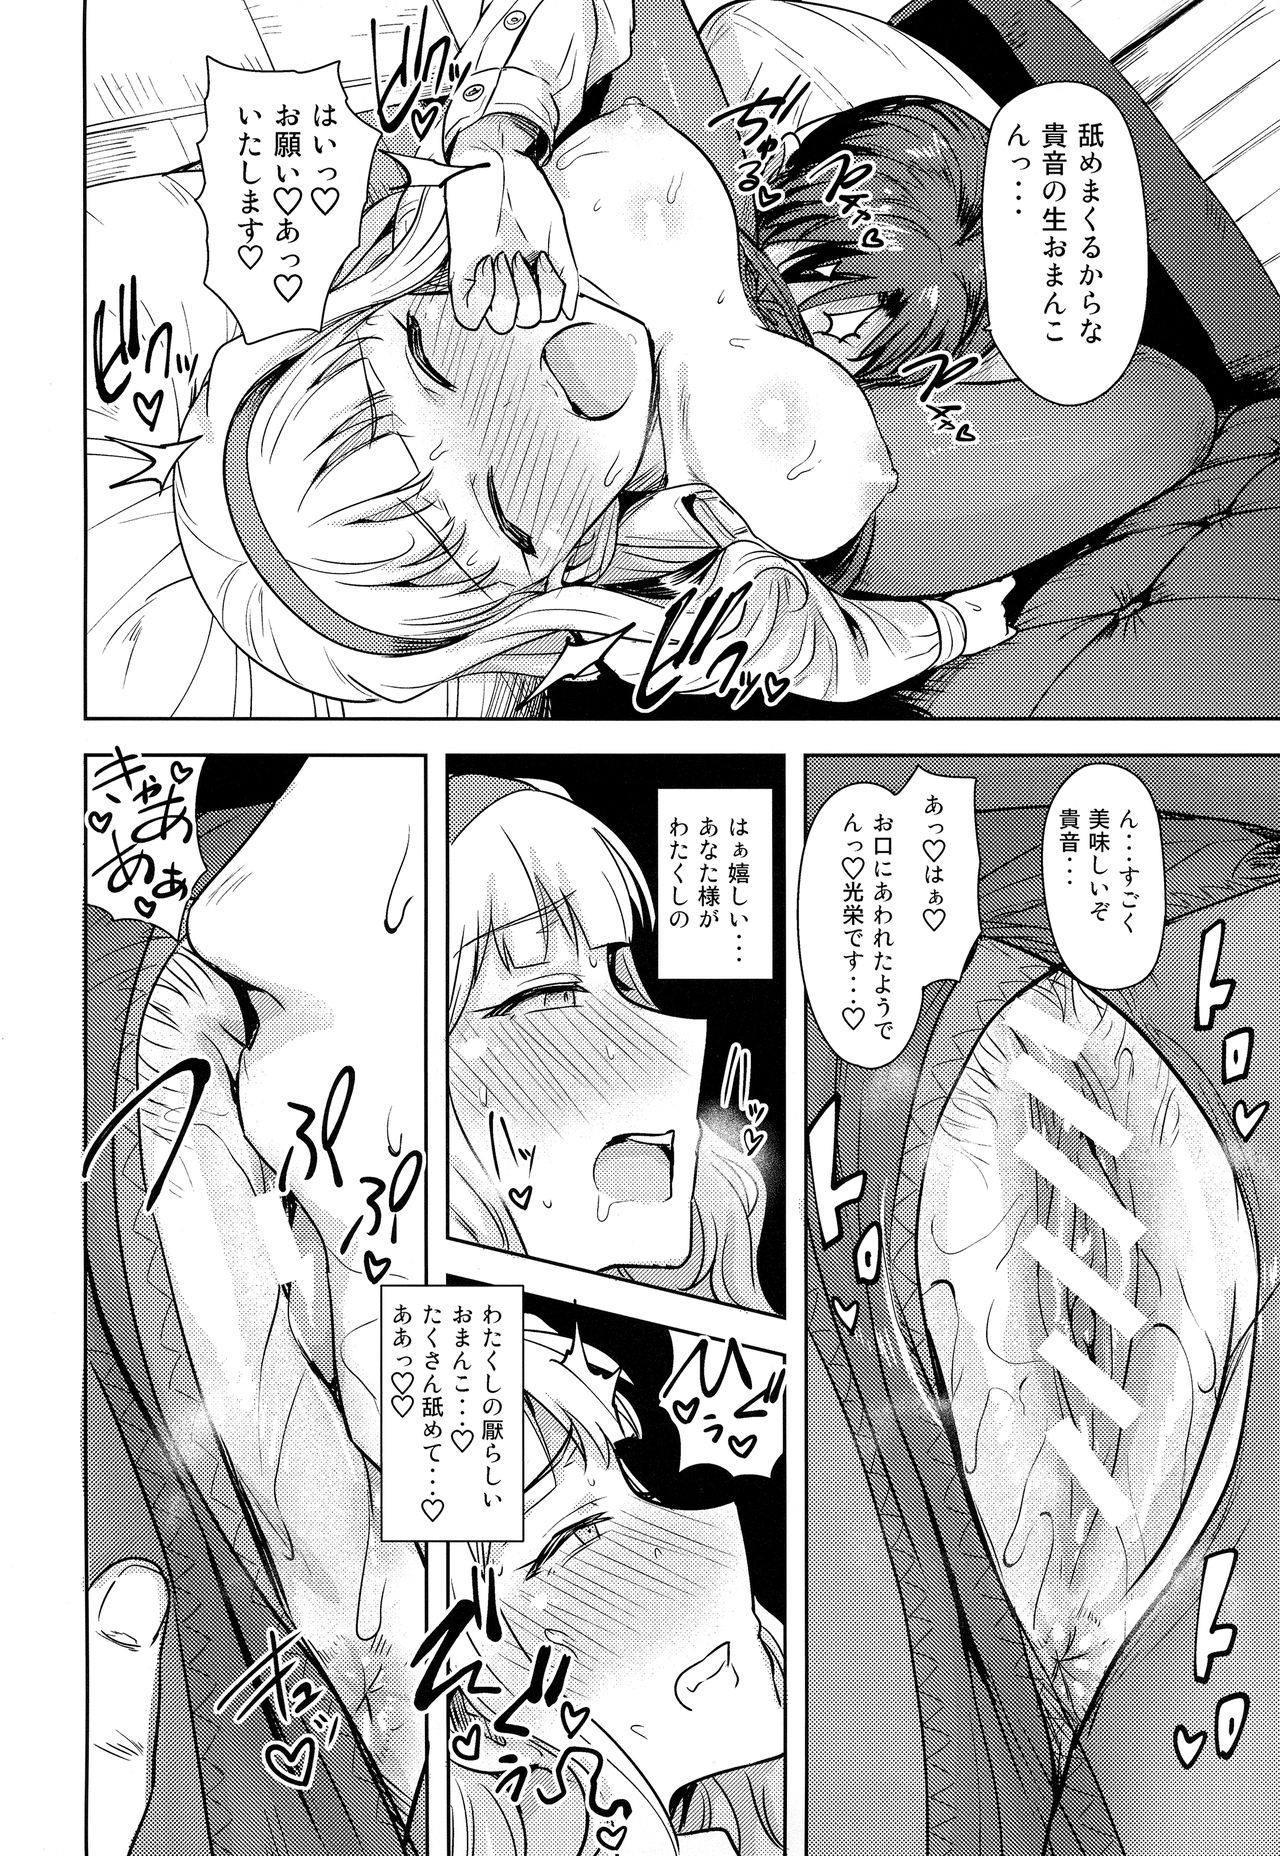 [PLANT (Tsurui)] SWEET MOON 2 (THE IDOLM@STER) page 23 full